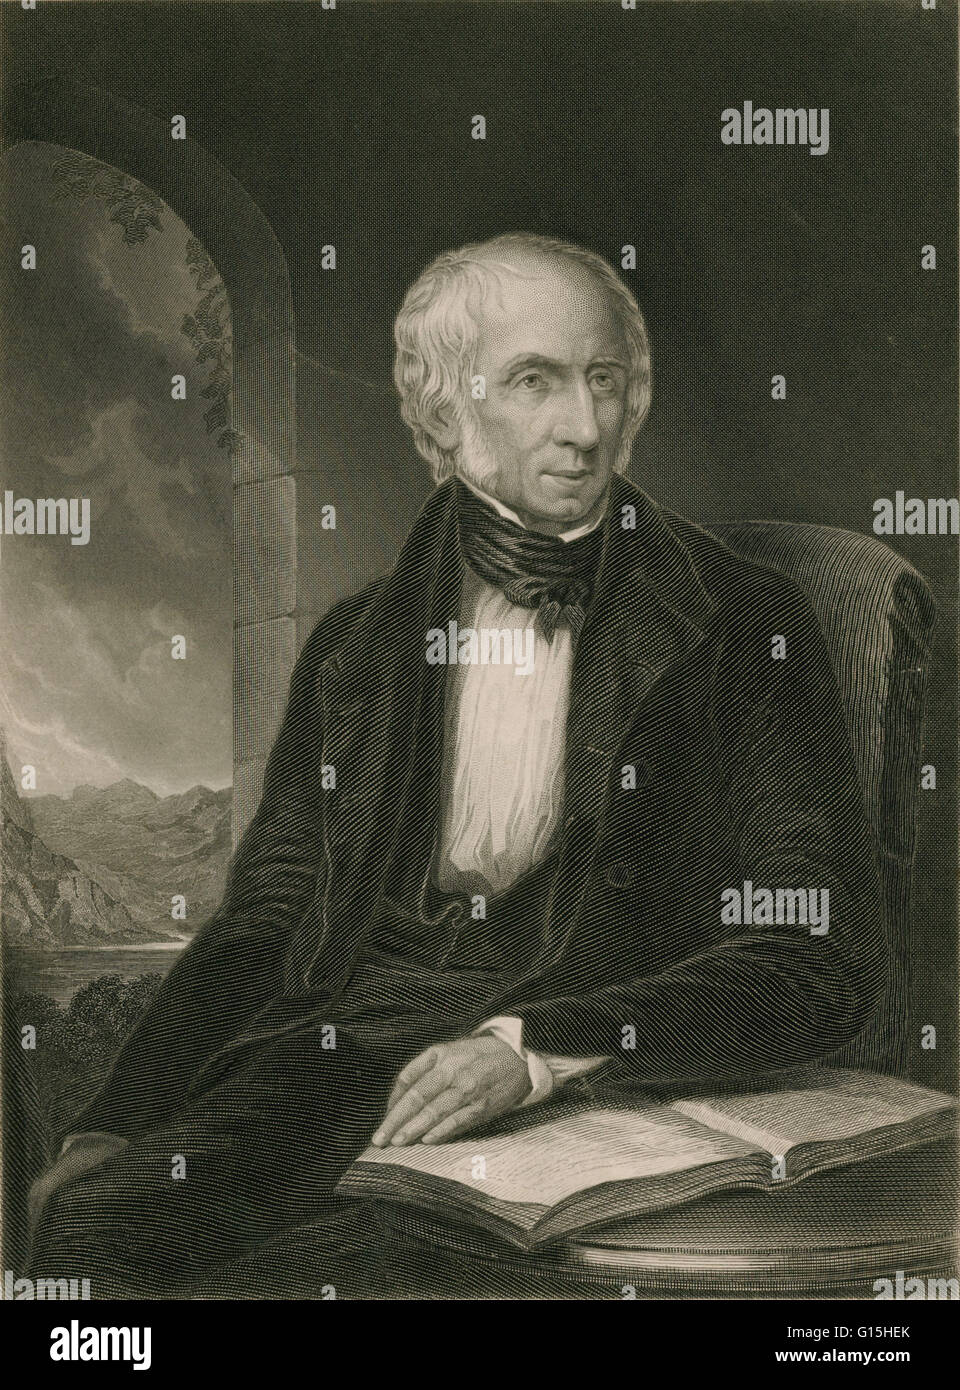 William Wordsworth (1770-1850) was a major English Romantic poet who, with Samuel Taylor Coleridge, helped to launch the Romantic Age in English literature with the 1798 joint publication Lyrical Ballads. Wordsworth's magnum opus is The Prelude, a semi-au Stock Photo